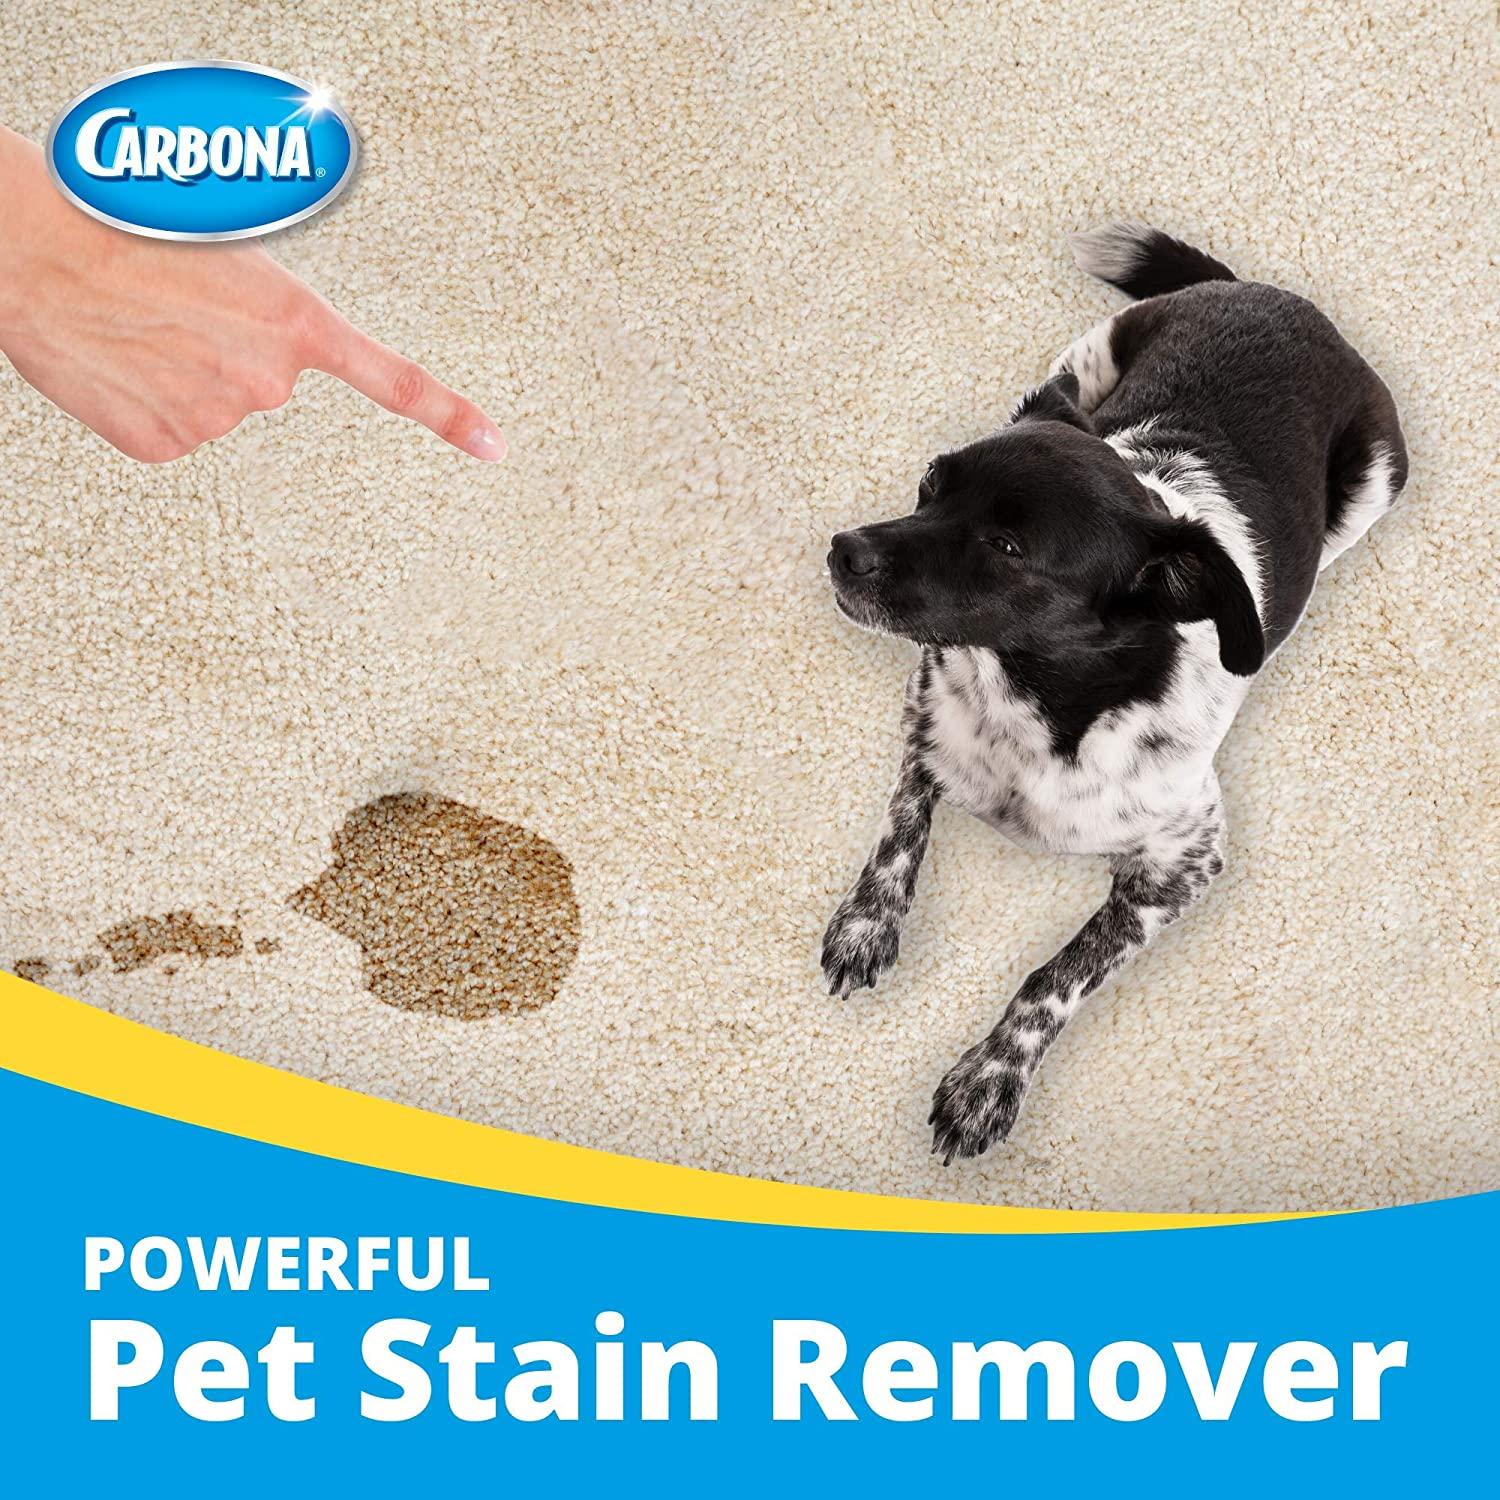 Carbona Oxy-Powered Pet Stain & Odor Remover w/ Active Foam Technology